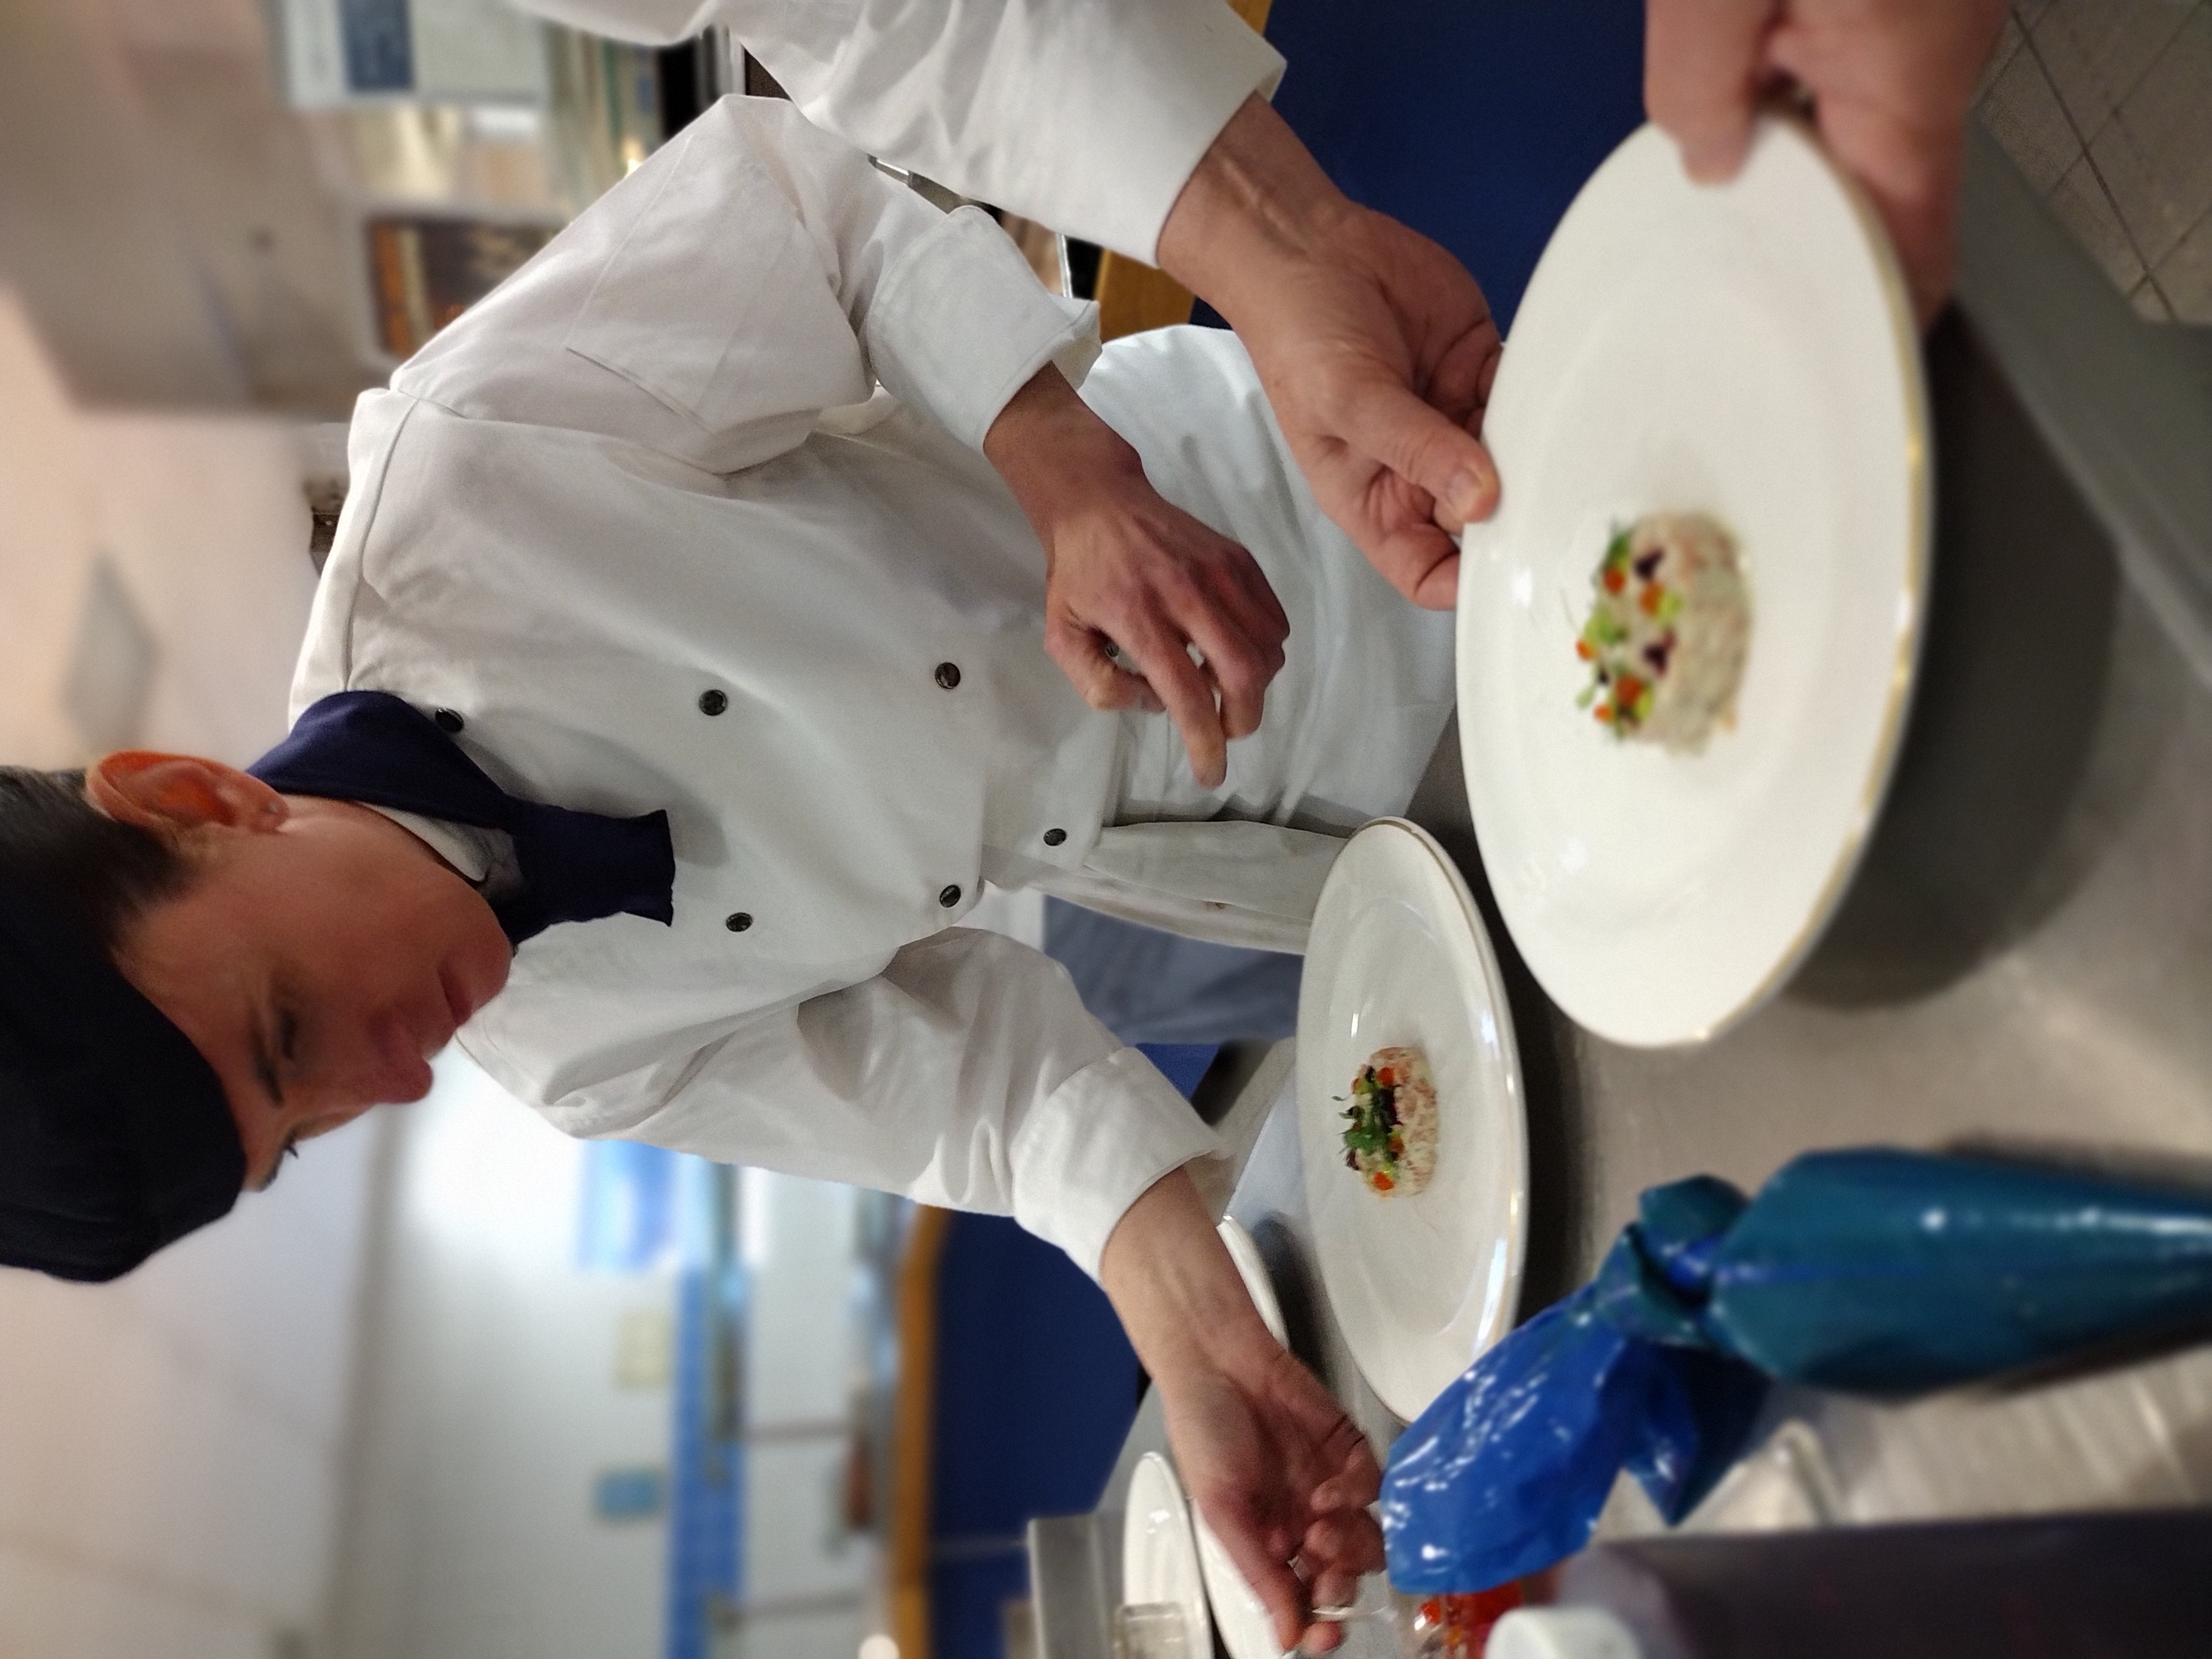 RAF Chef works with plates of food.